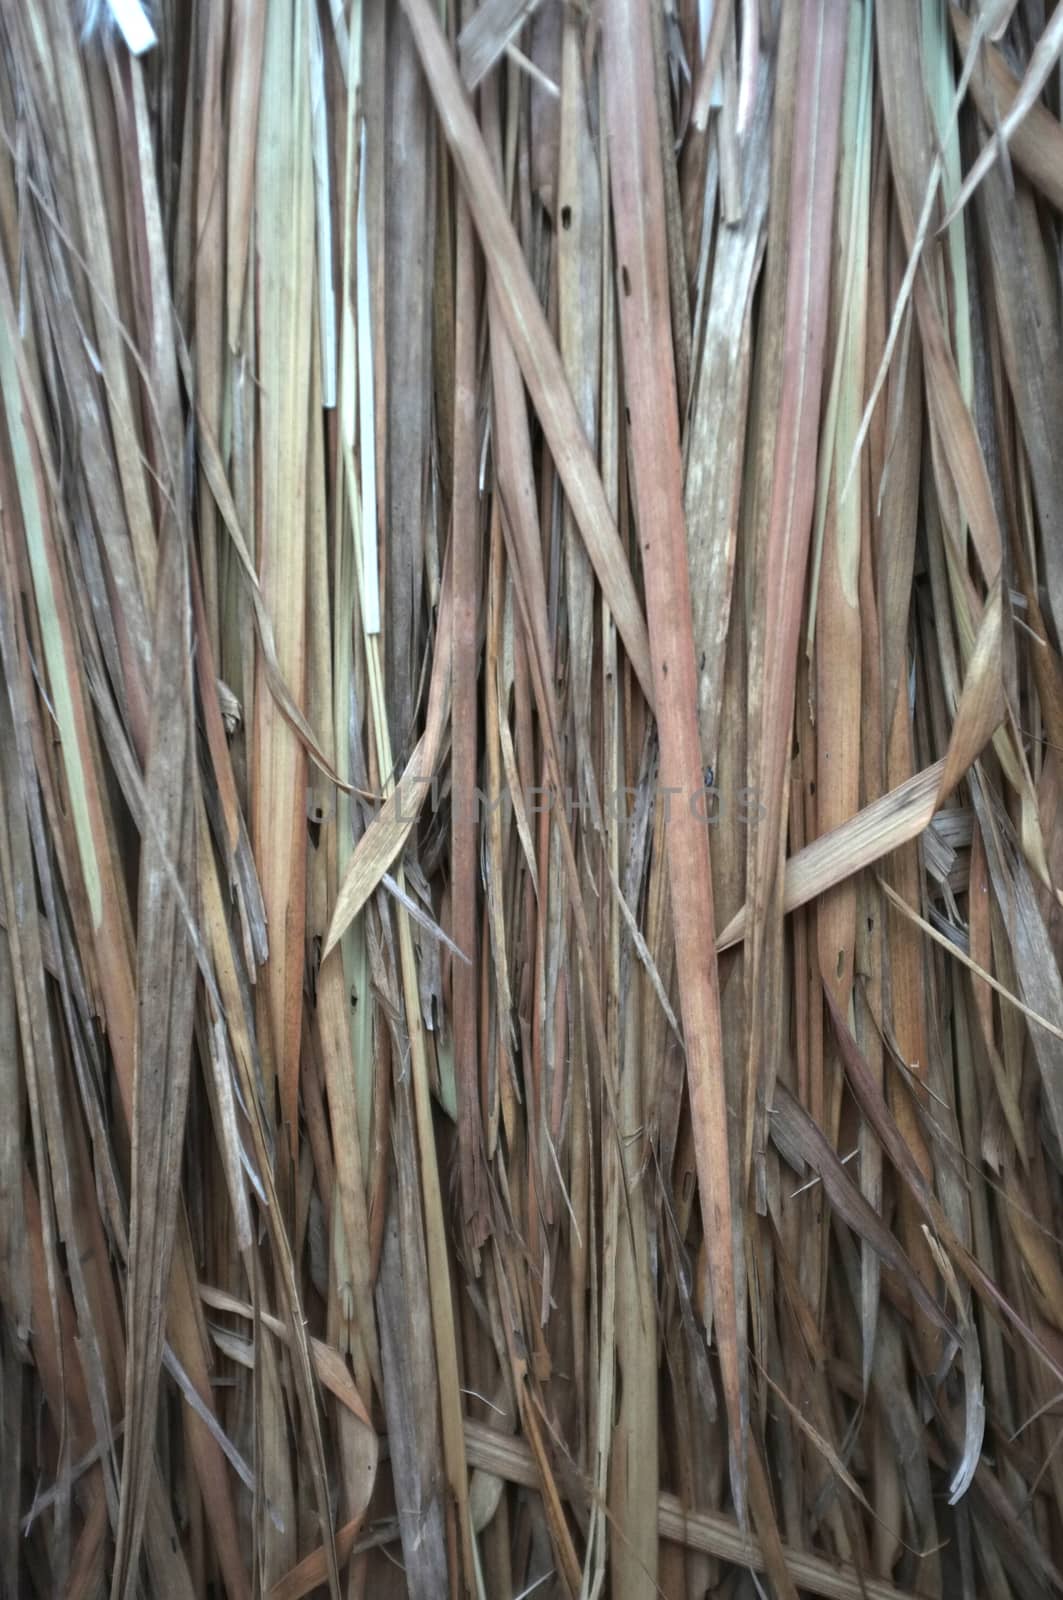 Close up view , dry straw thatch roof of traditional 